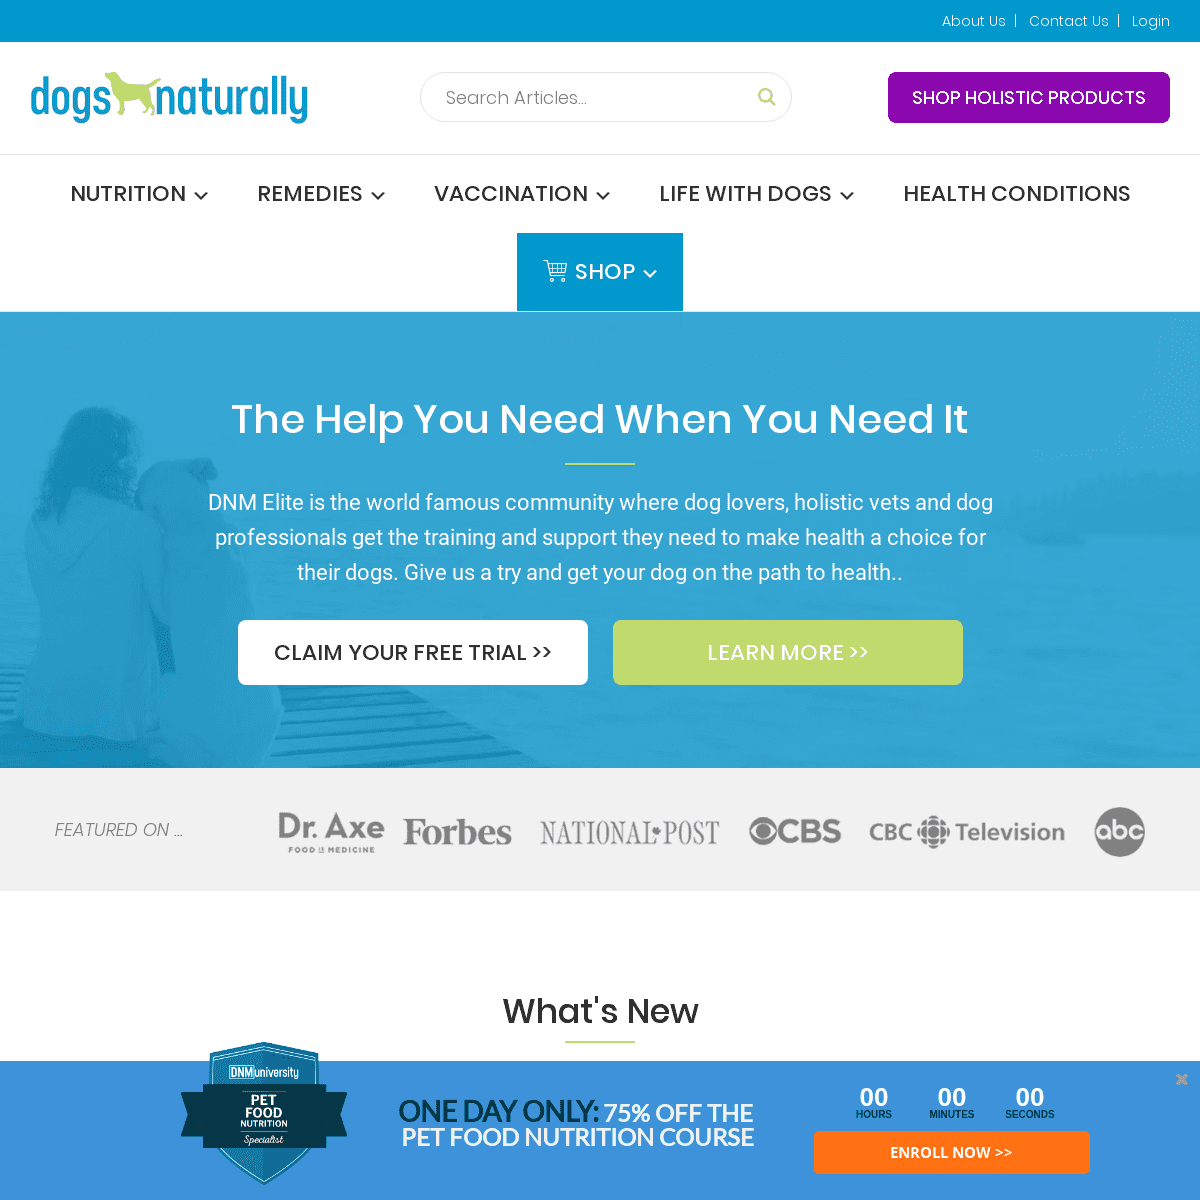 A complete backup of dogsnaturallymagazine.com